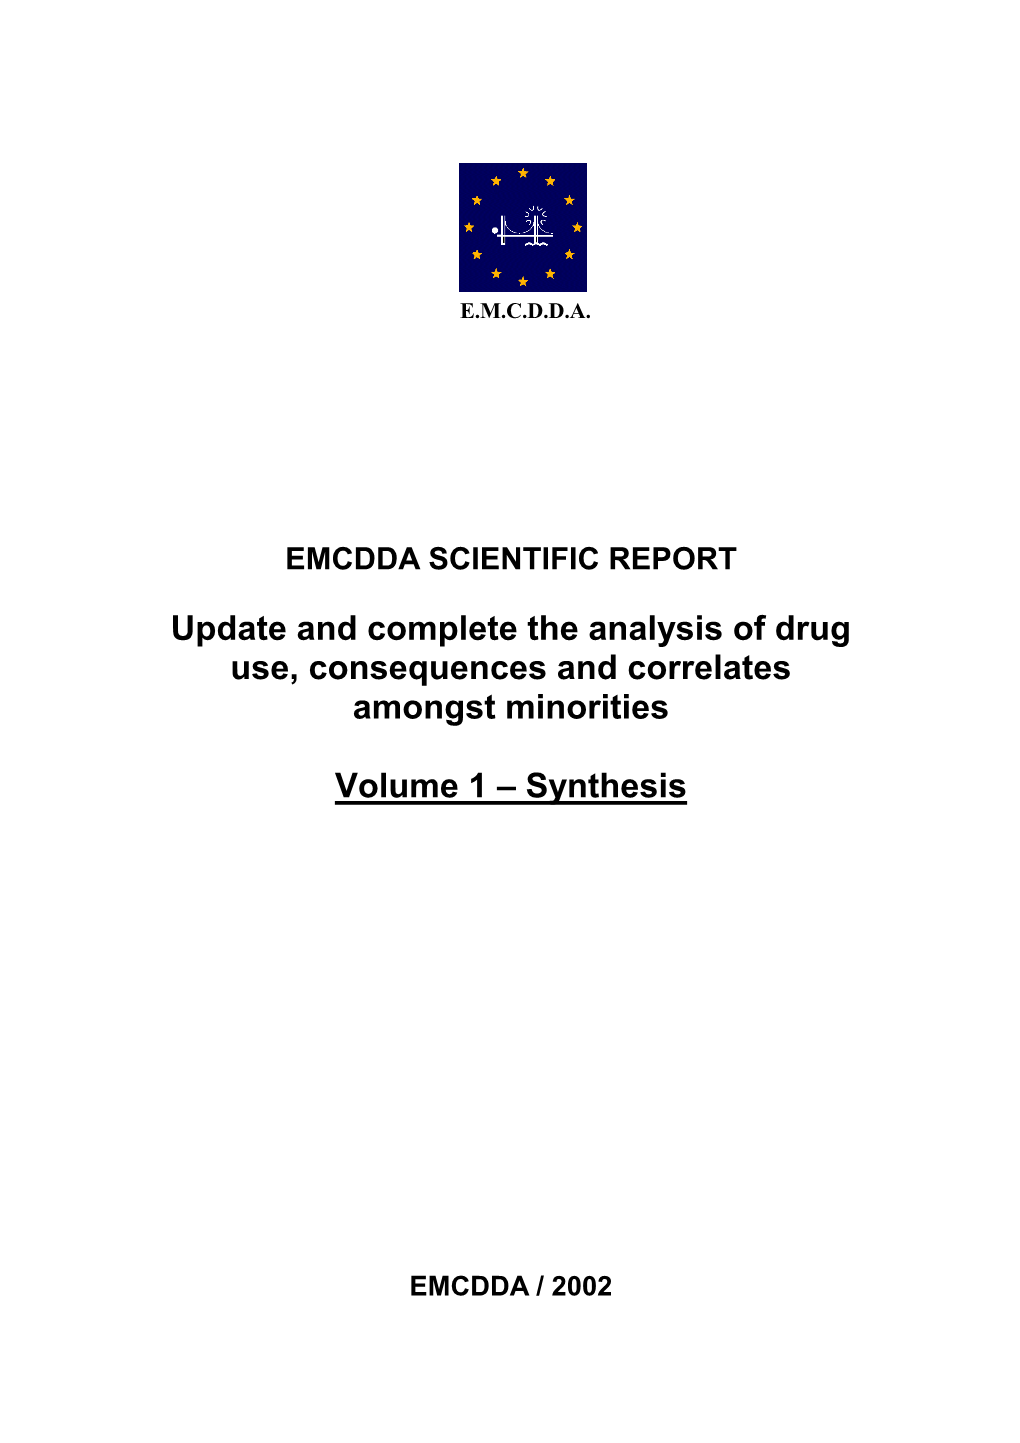 Update and Complete the Analysis of Drug Use, Consequences and Correlates Amongst Minorities